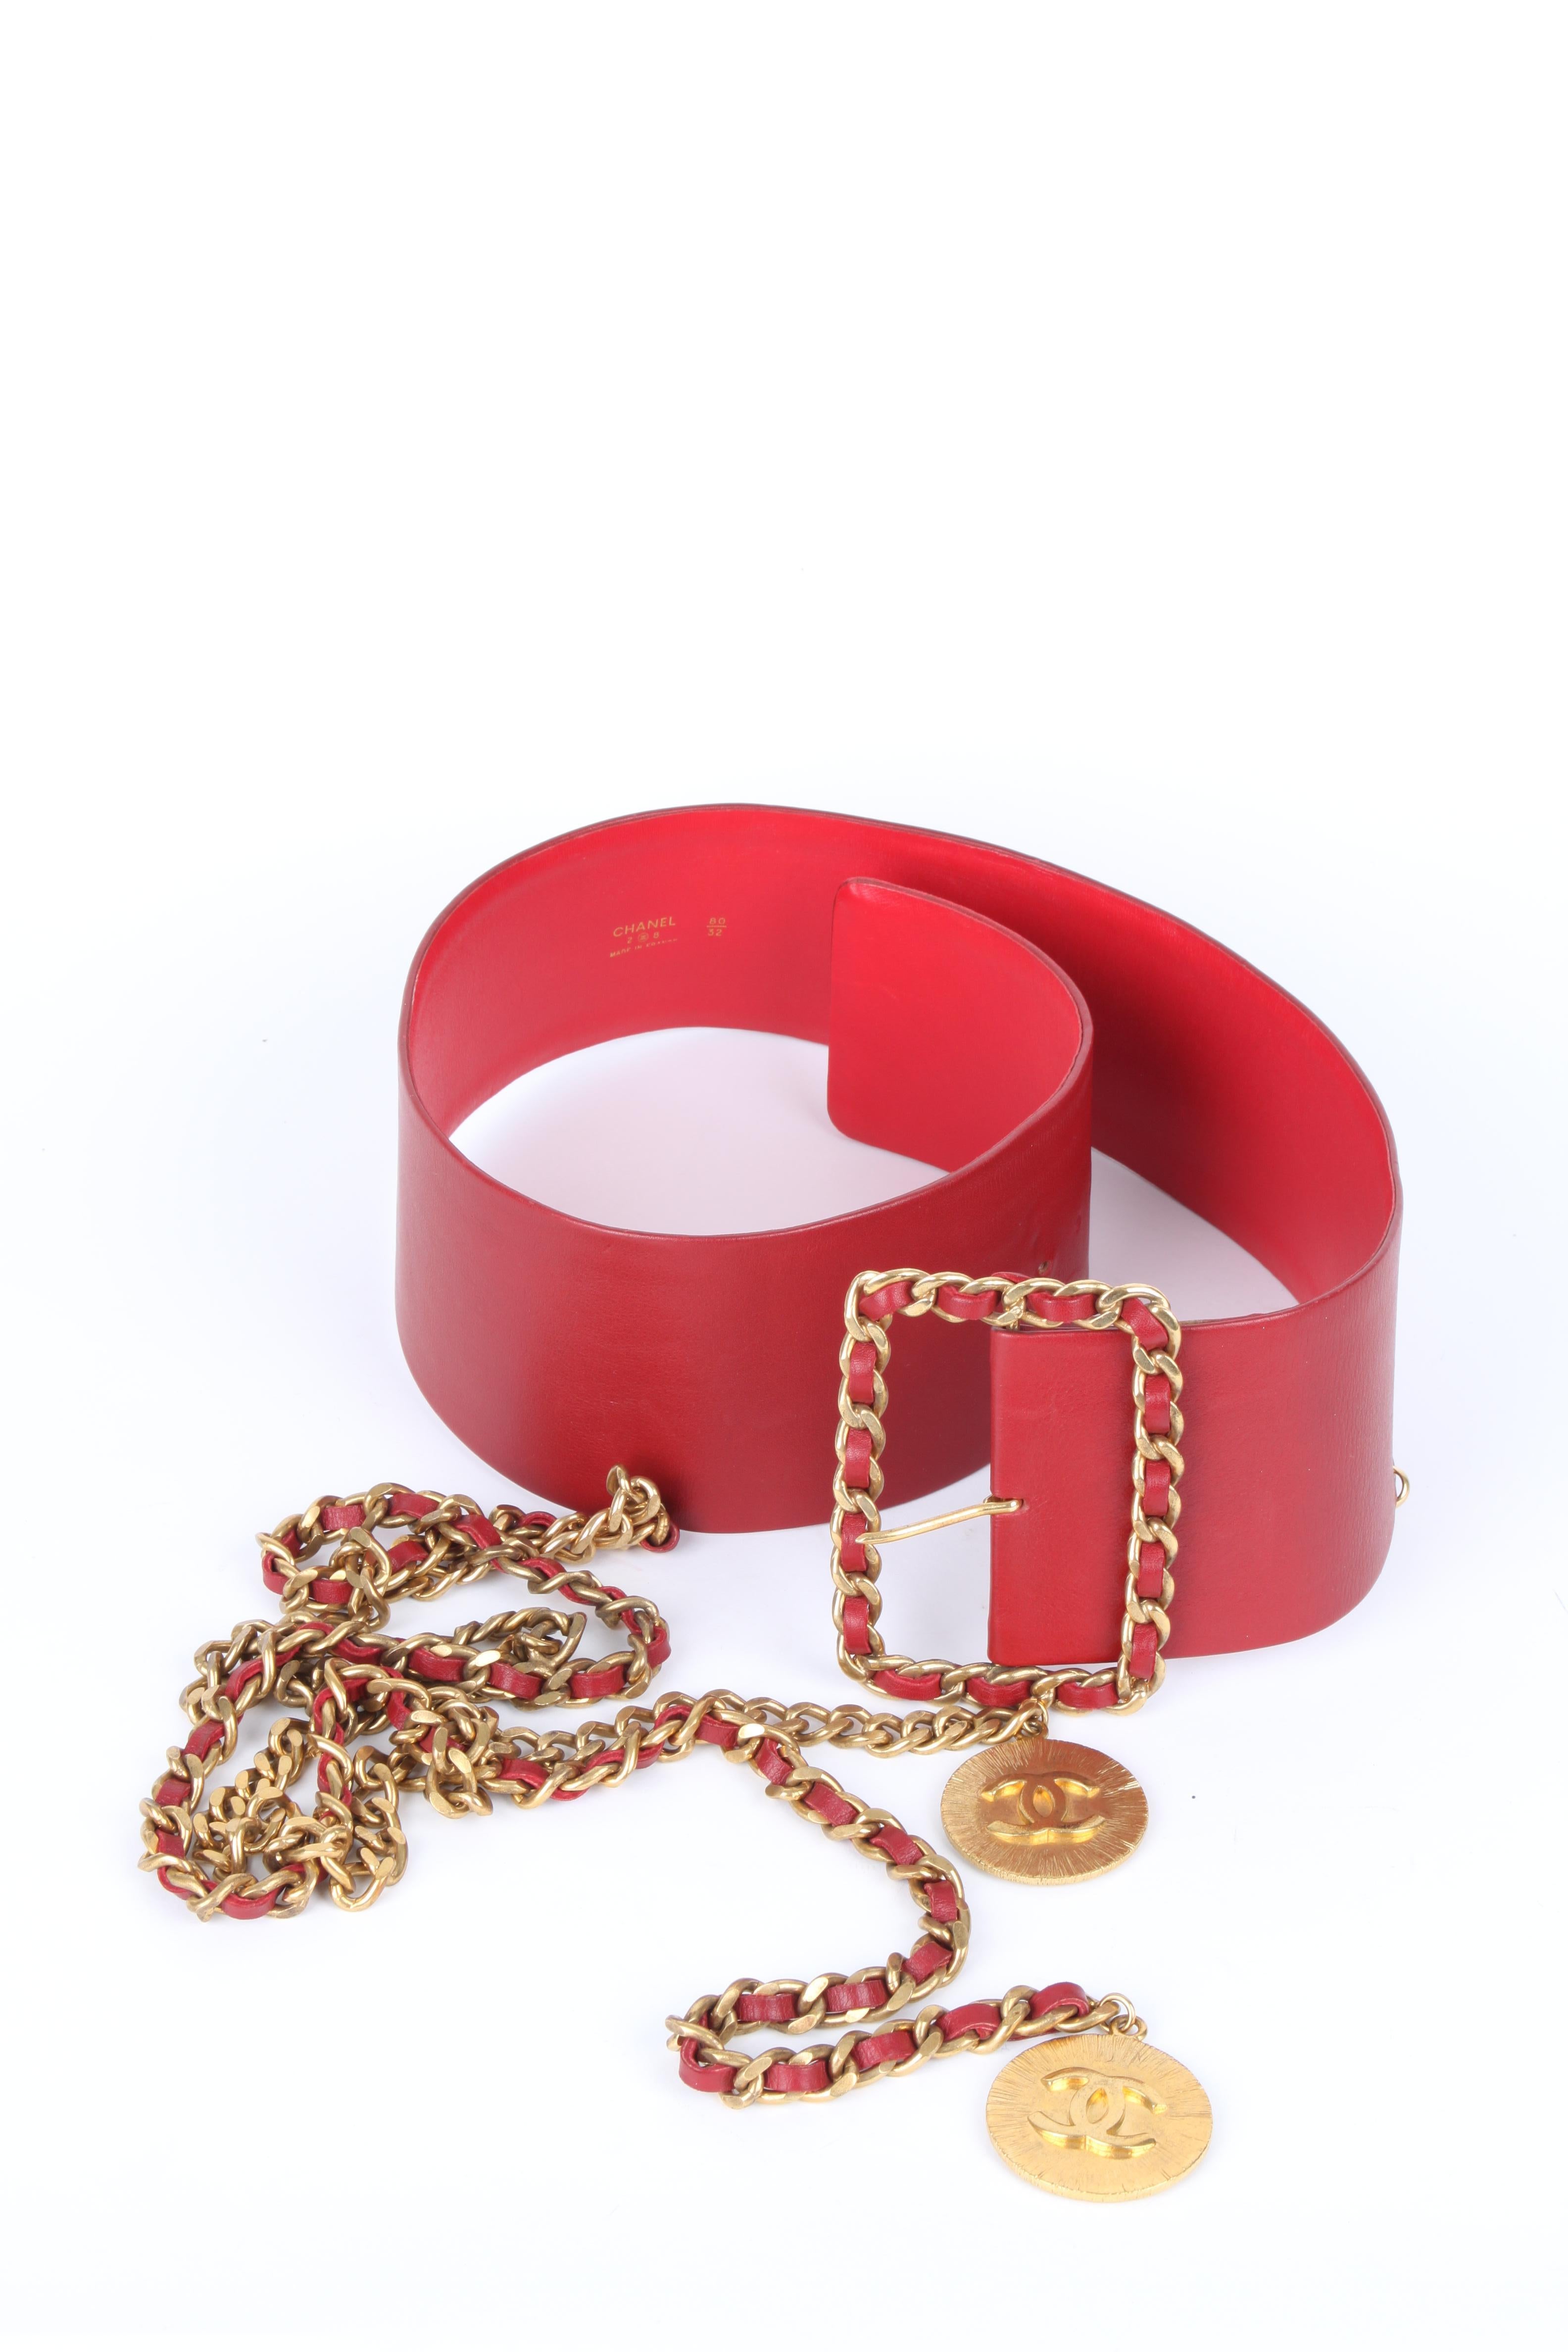 Chanel 1991 Wide Long Chain Medallion Red Leather Belt For Sale 1